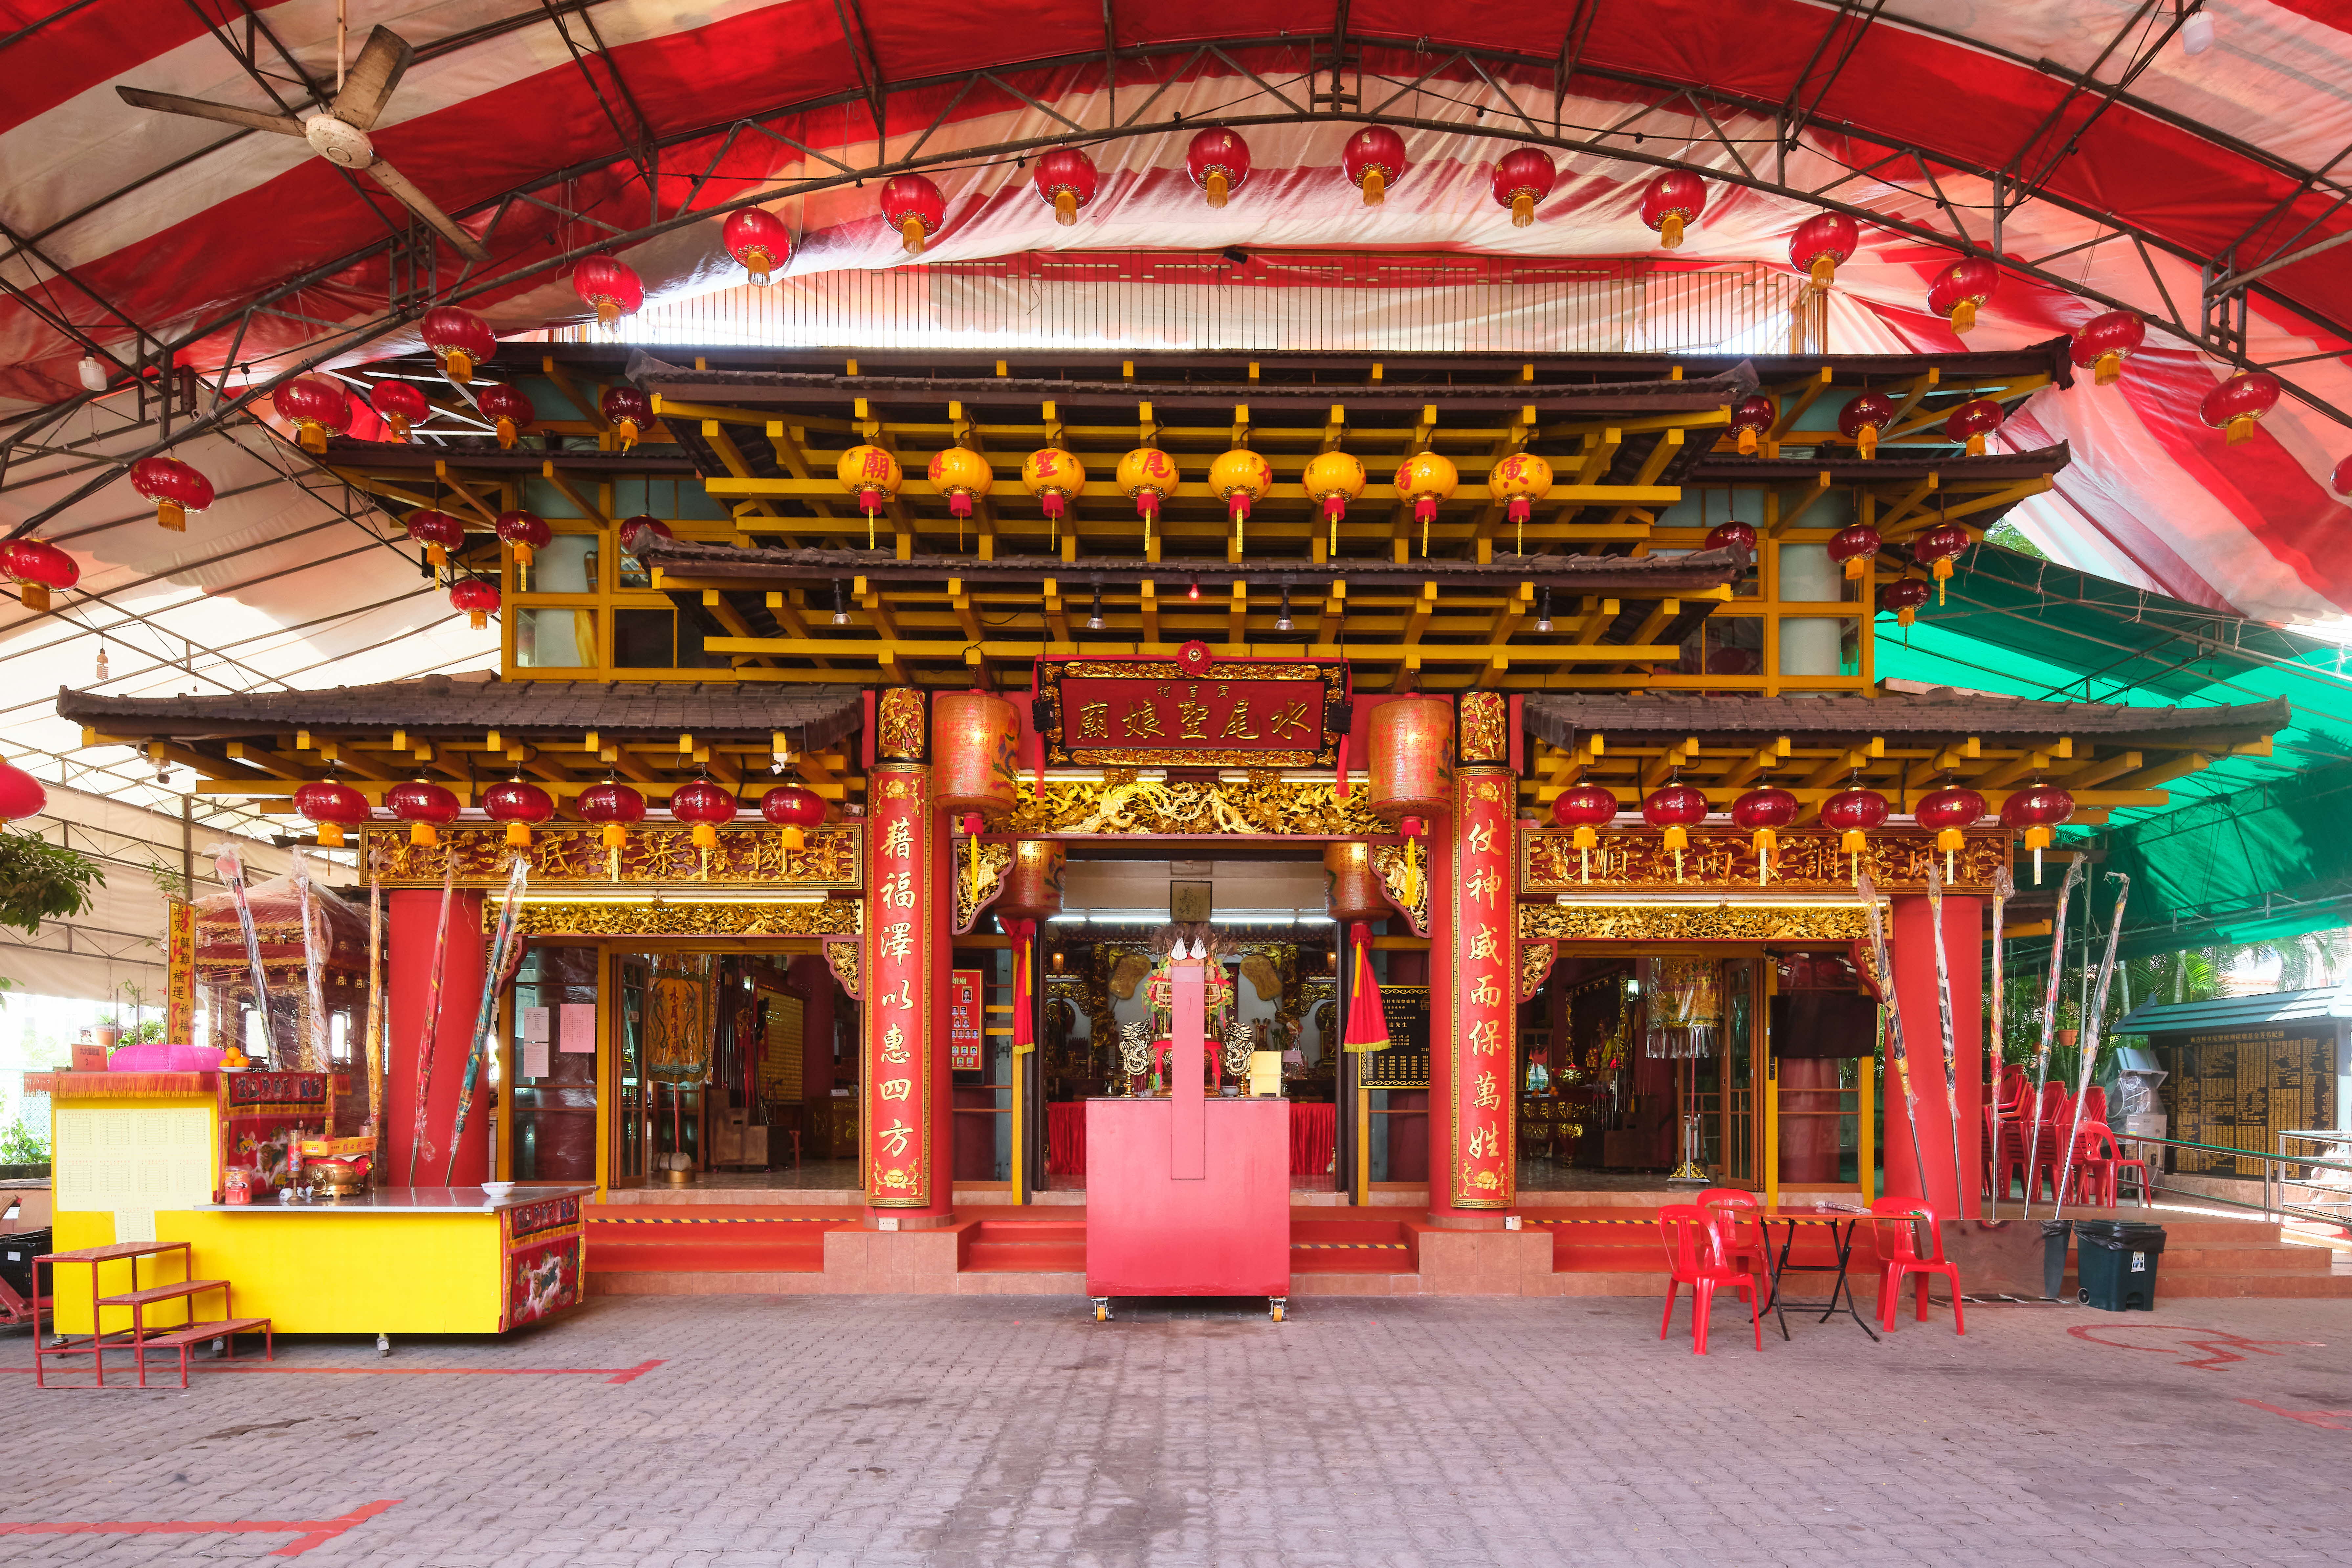 Founded in 1939, Yan Kit Village Chinese Temple enshrines Shui Wei Sheng Niang, 108 Brother Deities and other deities. The temple was established by residents of the former Yan Kit Village, which was located in the same area, and it continues to maintain longstanding connections with the Hainanese community while also welcoming worshippers from other communities.